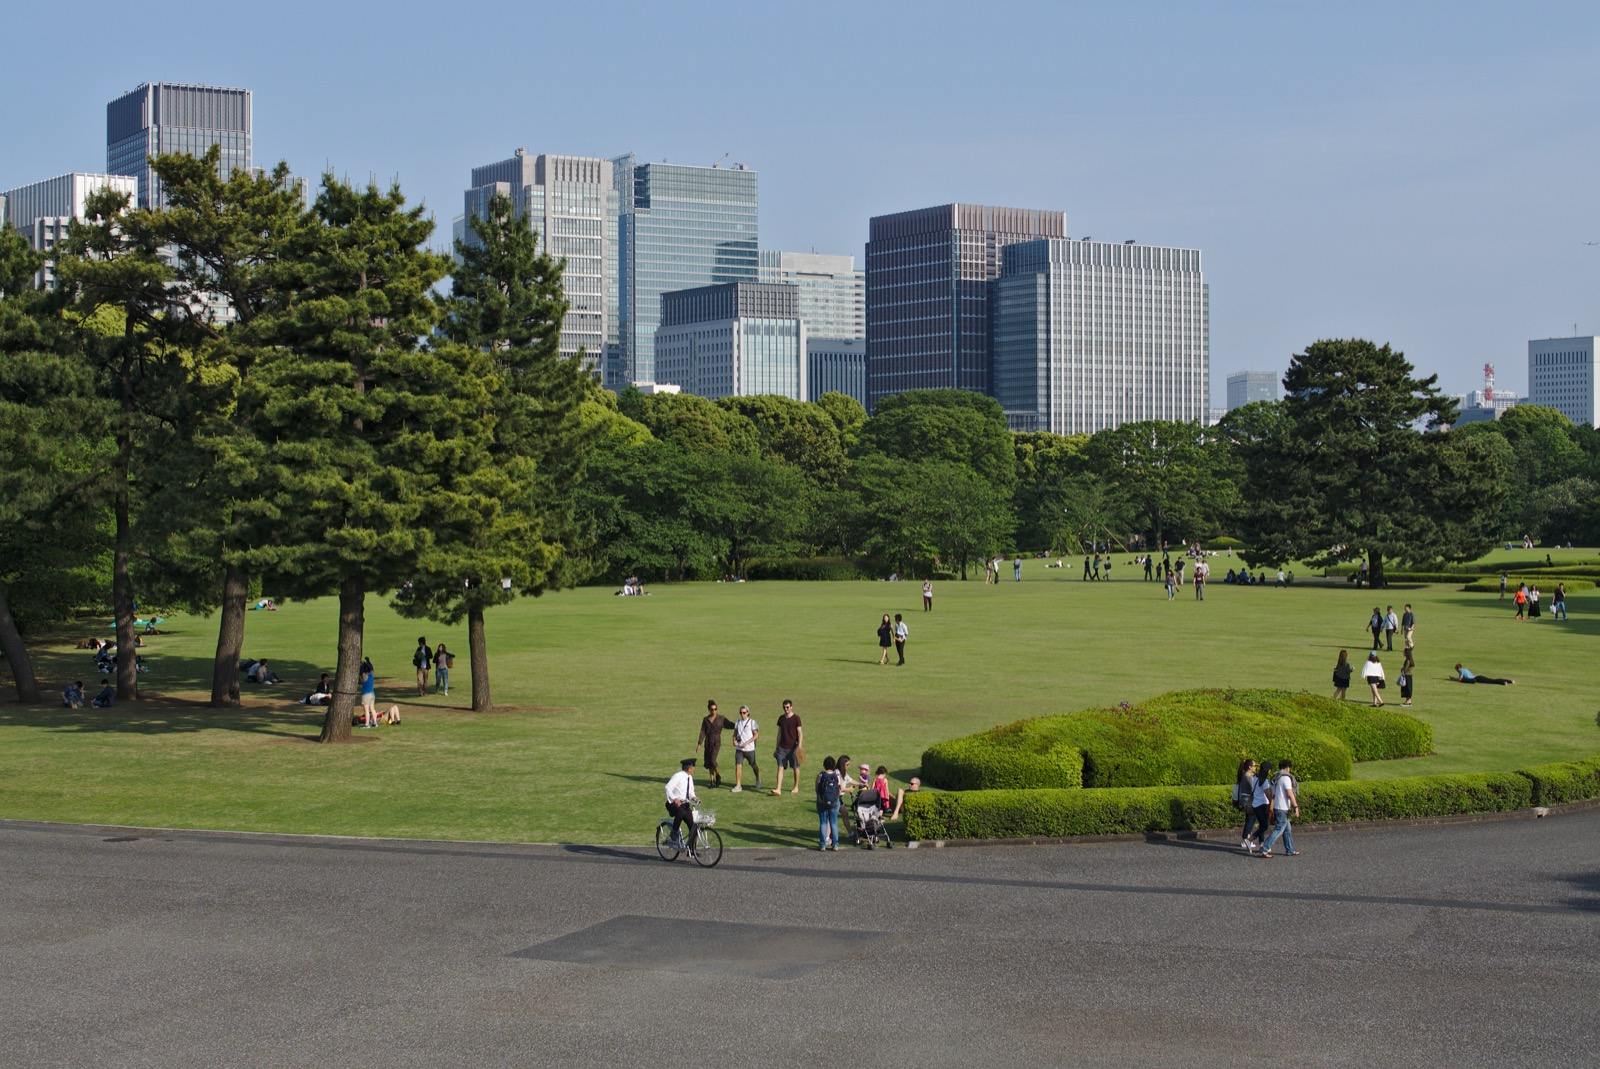 Photo of Imperial Palace East Garden, Japan (Park in the East Gardens of the Imperial Palace, Tokyo, Japan by Alexander Klink)